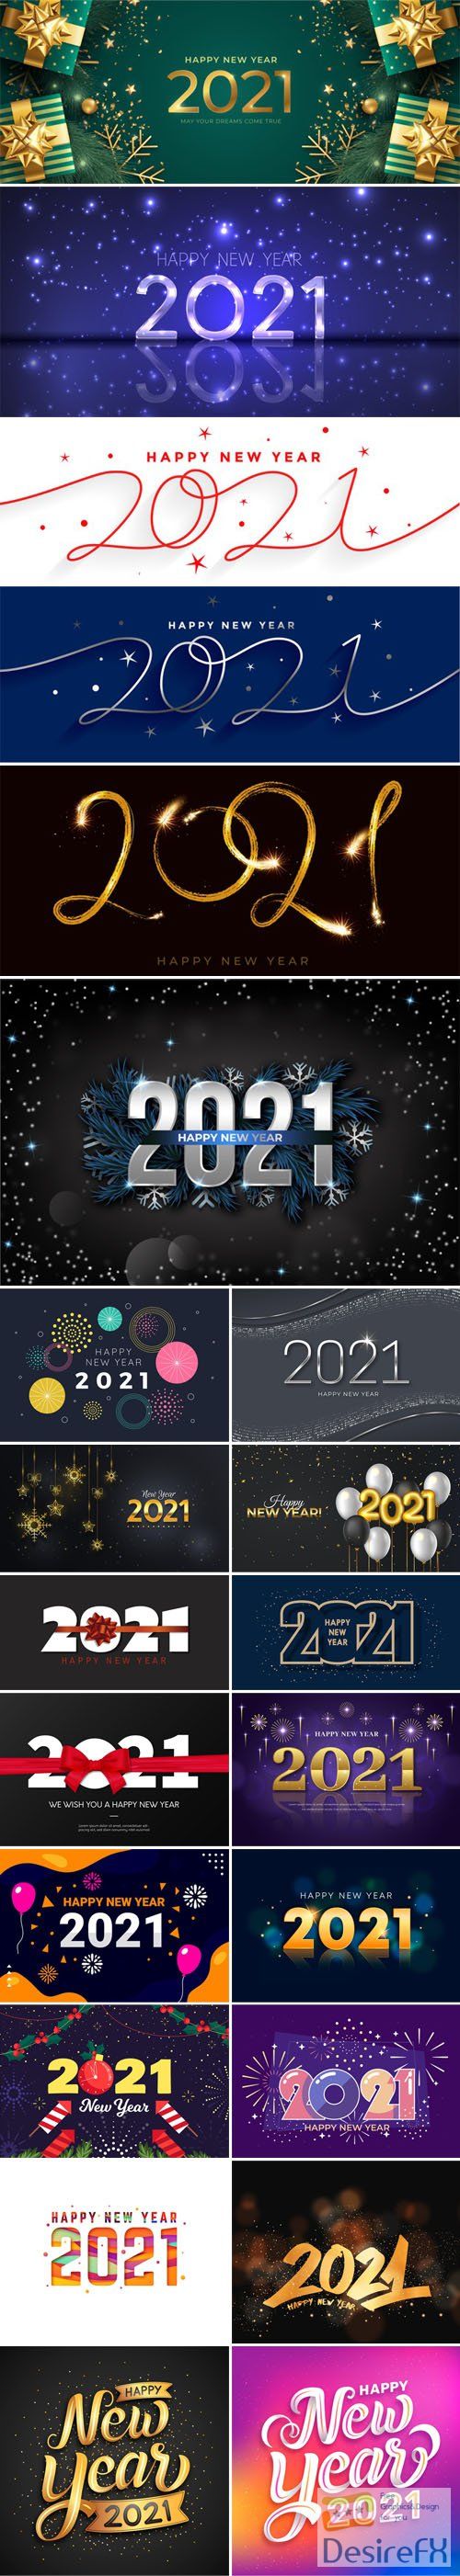 23 Happy New Year 2021 Backgrounds &amp; Lettering Templates in Vector